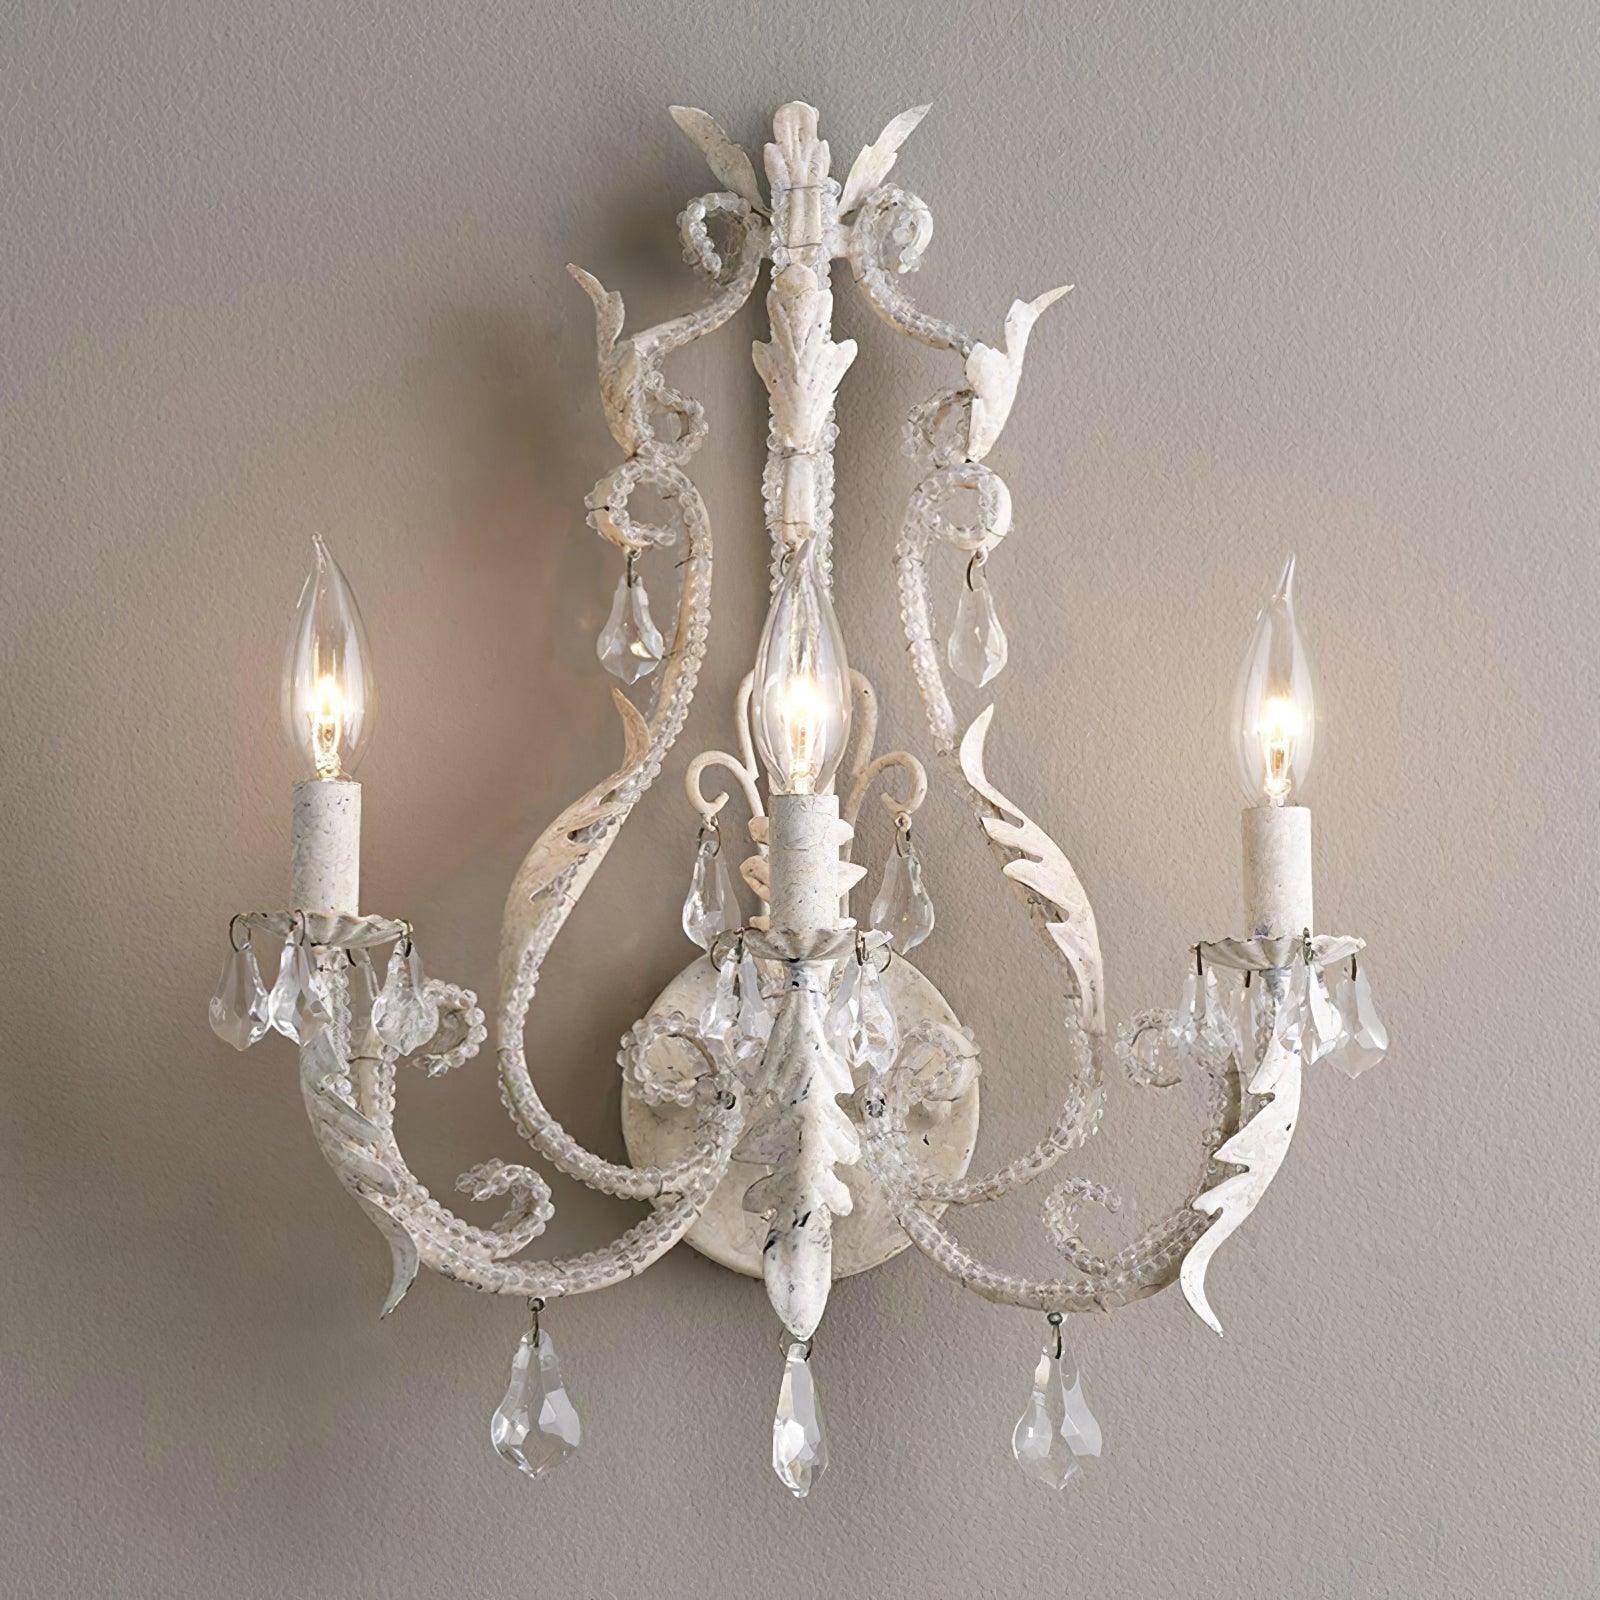 Old White Floral Crystal Candle Wall Lamps - Set of 2